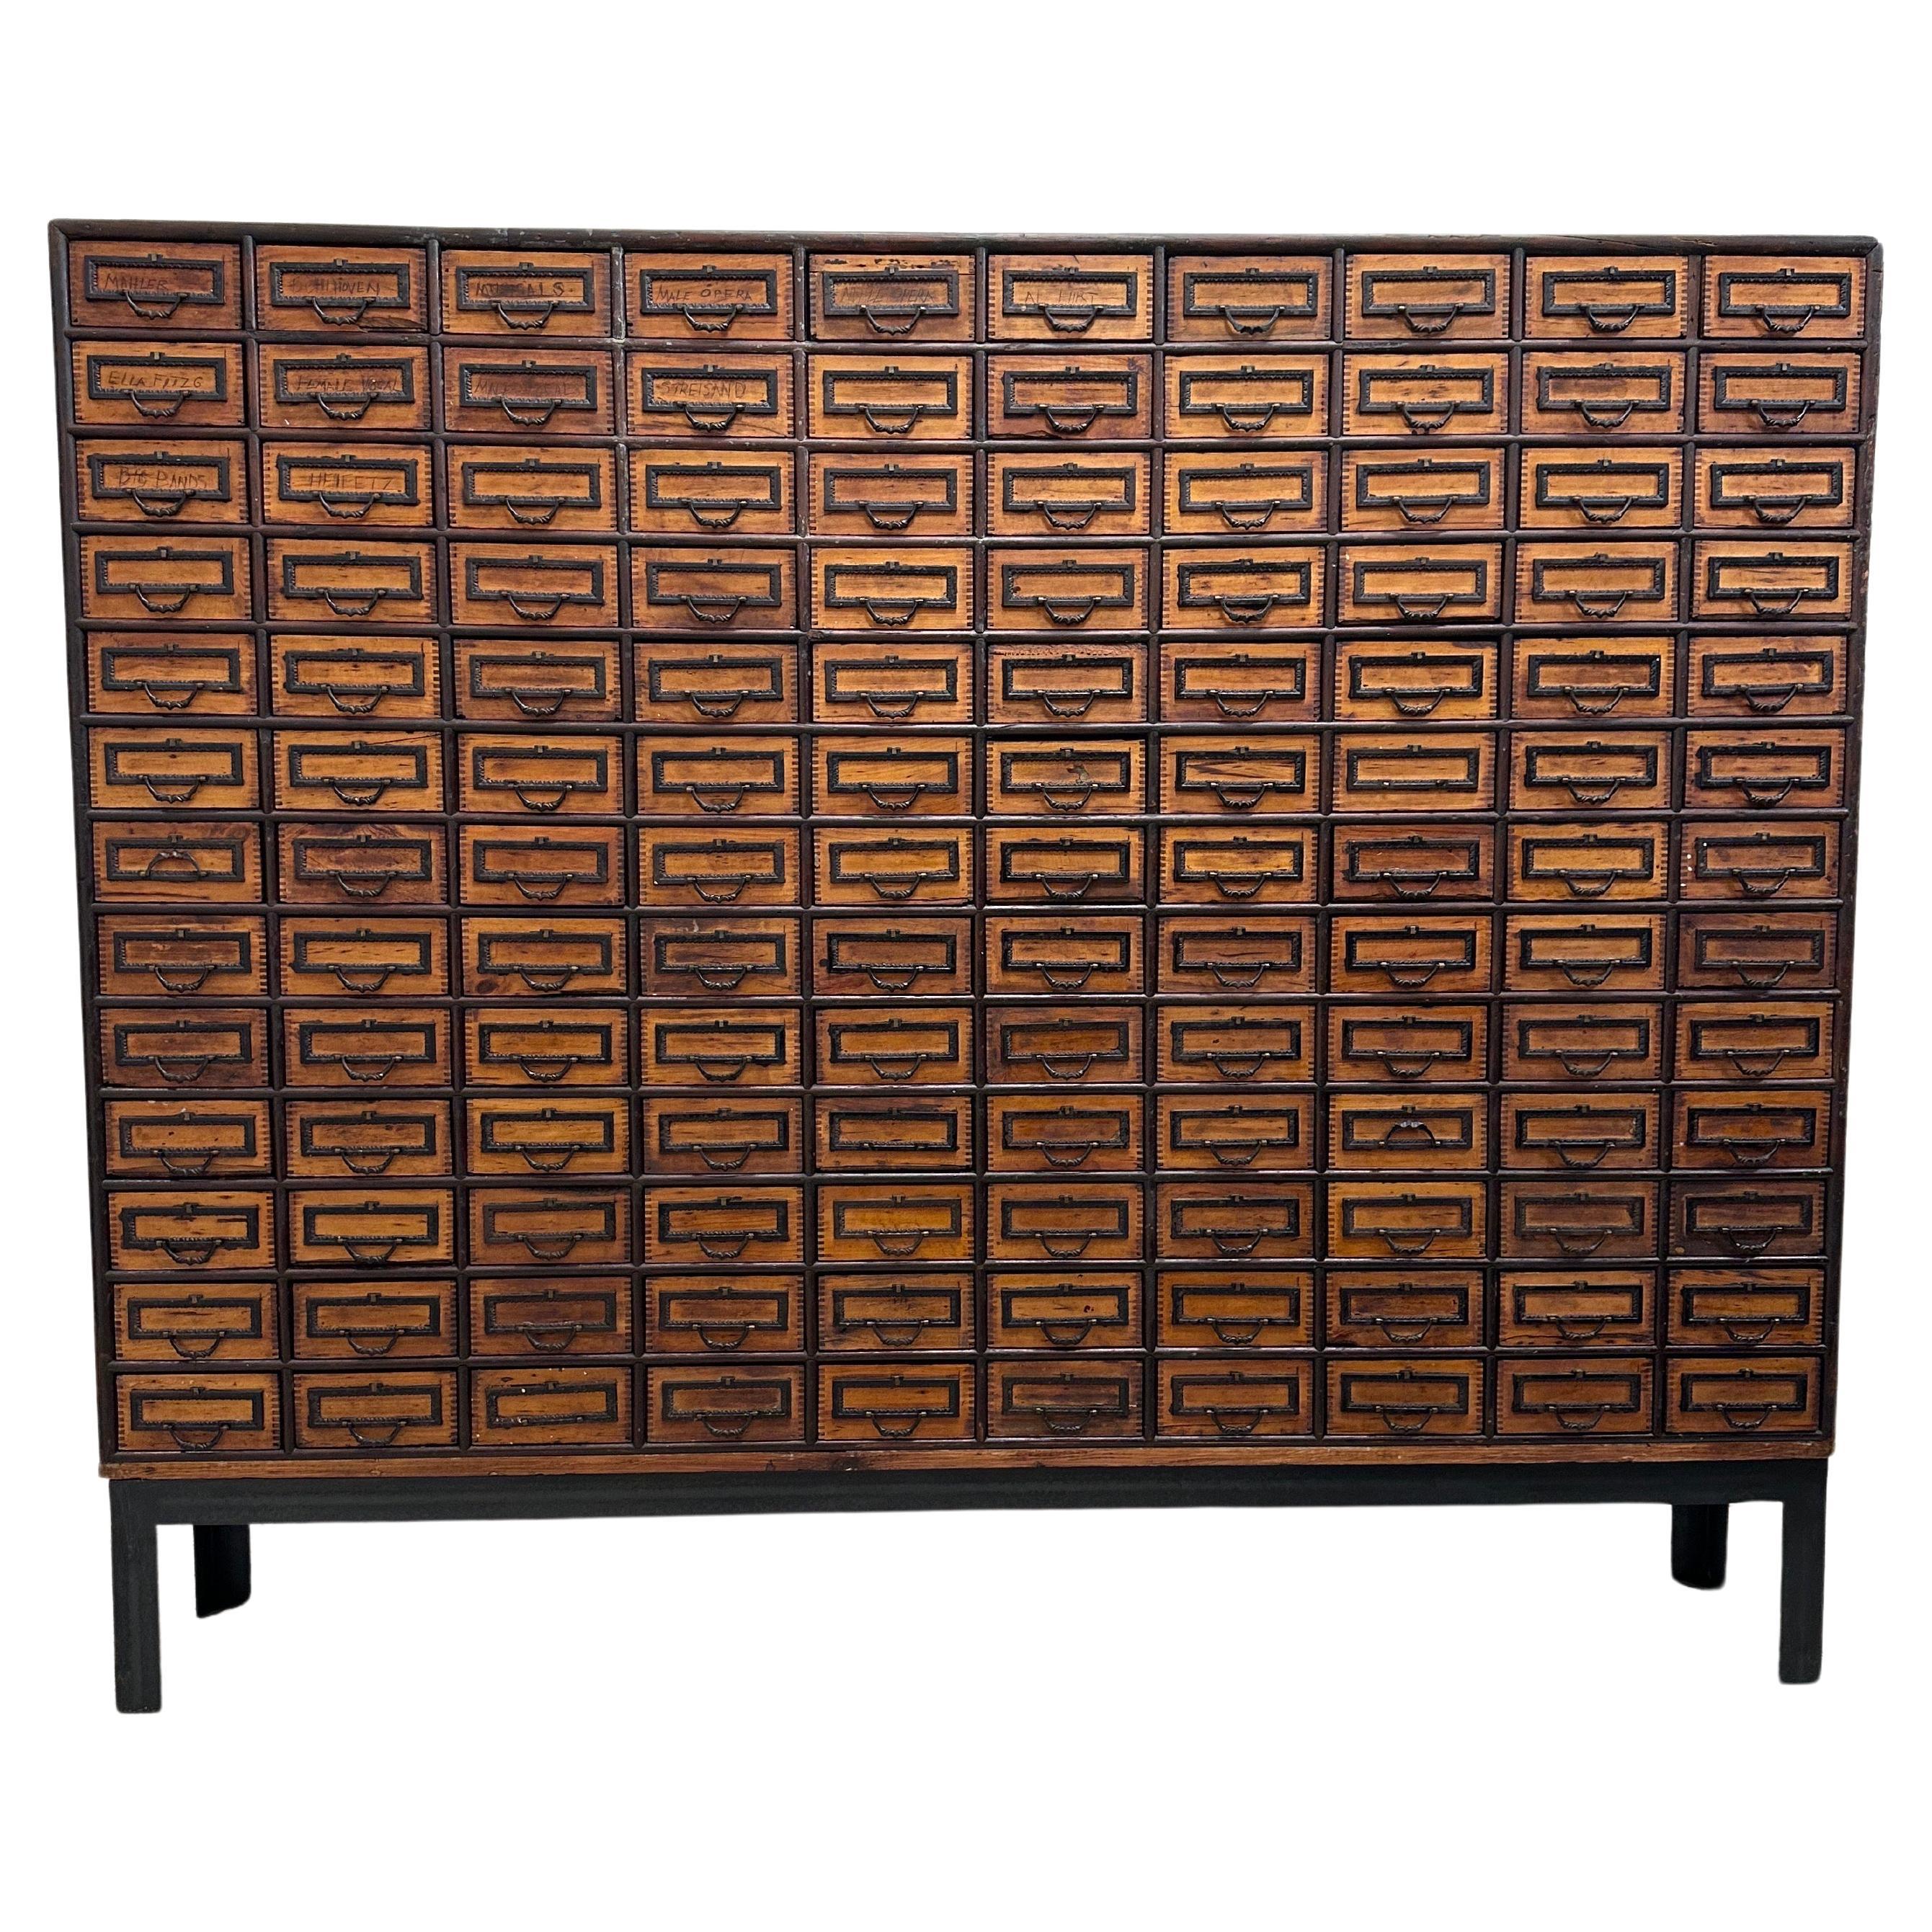 Massive 19th C. European Apothecary Cabinet, 130 Individual Drawers